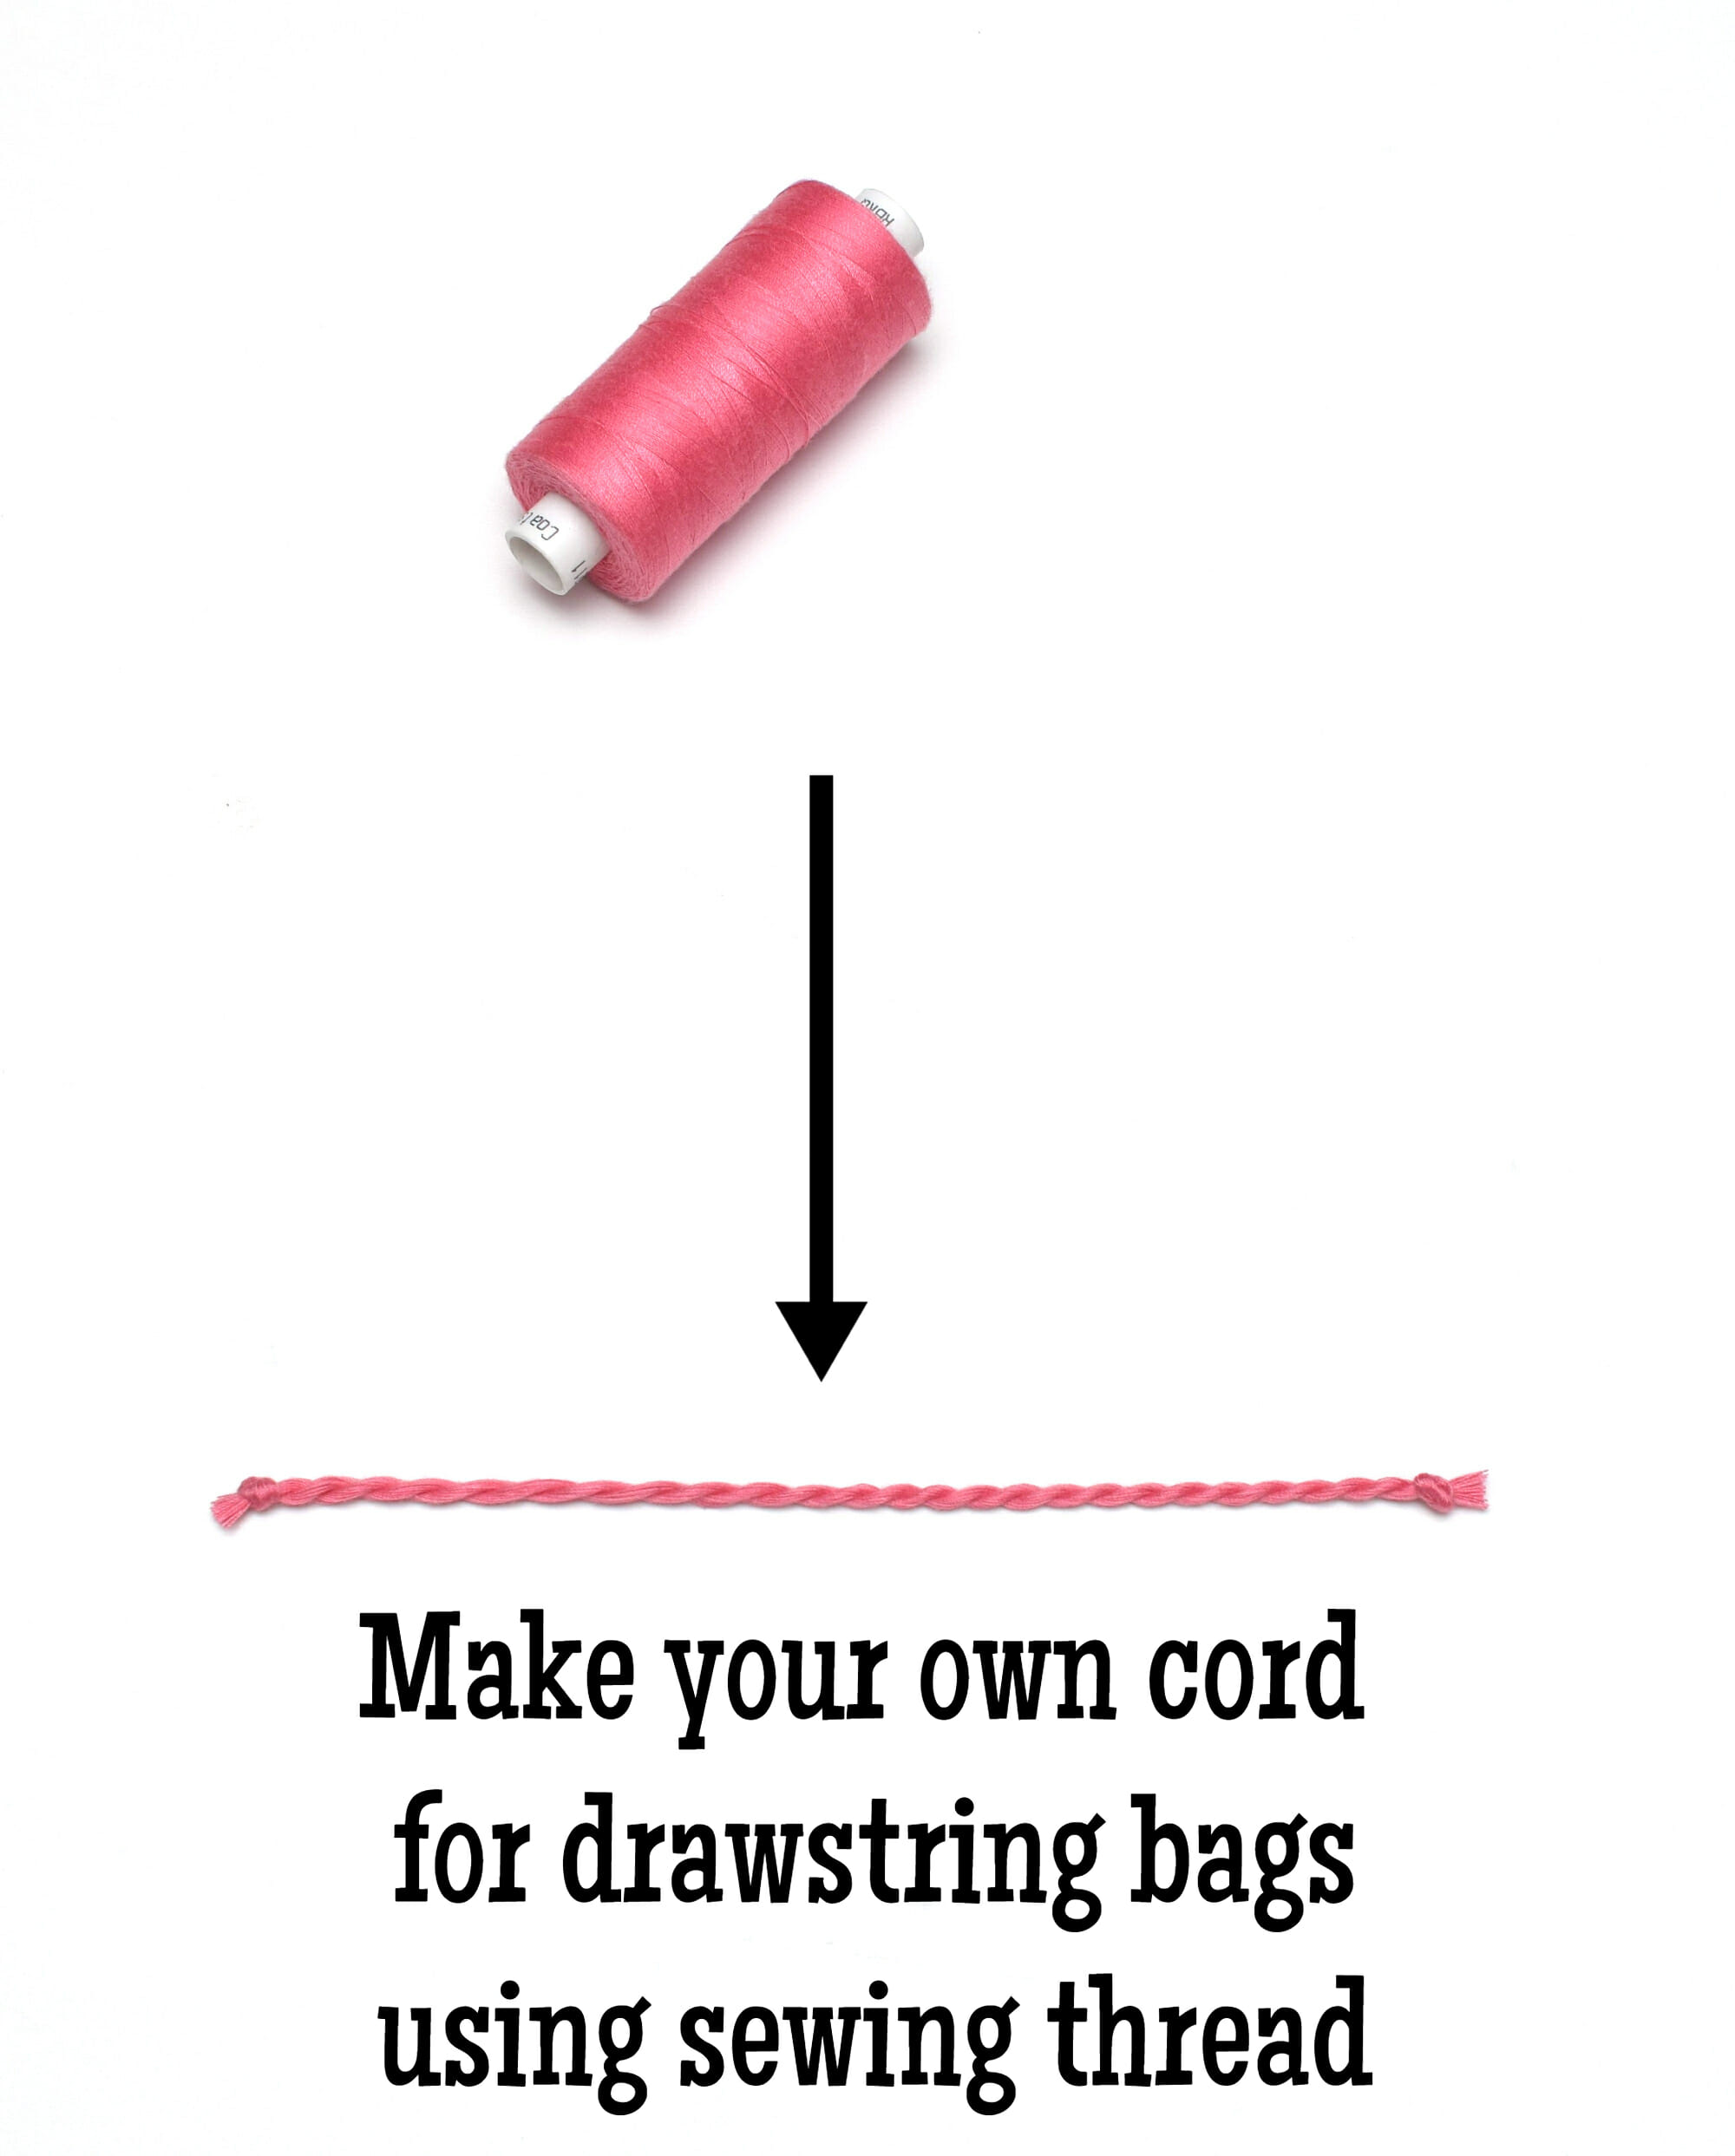 Make cord for drawstring bags using sewing thread